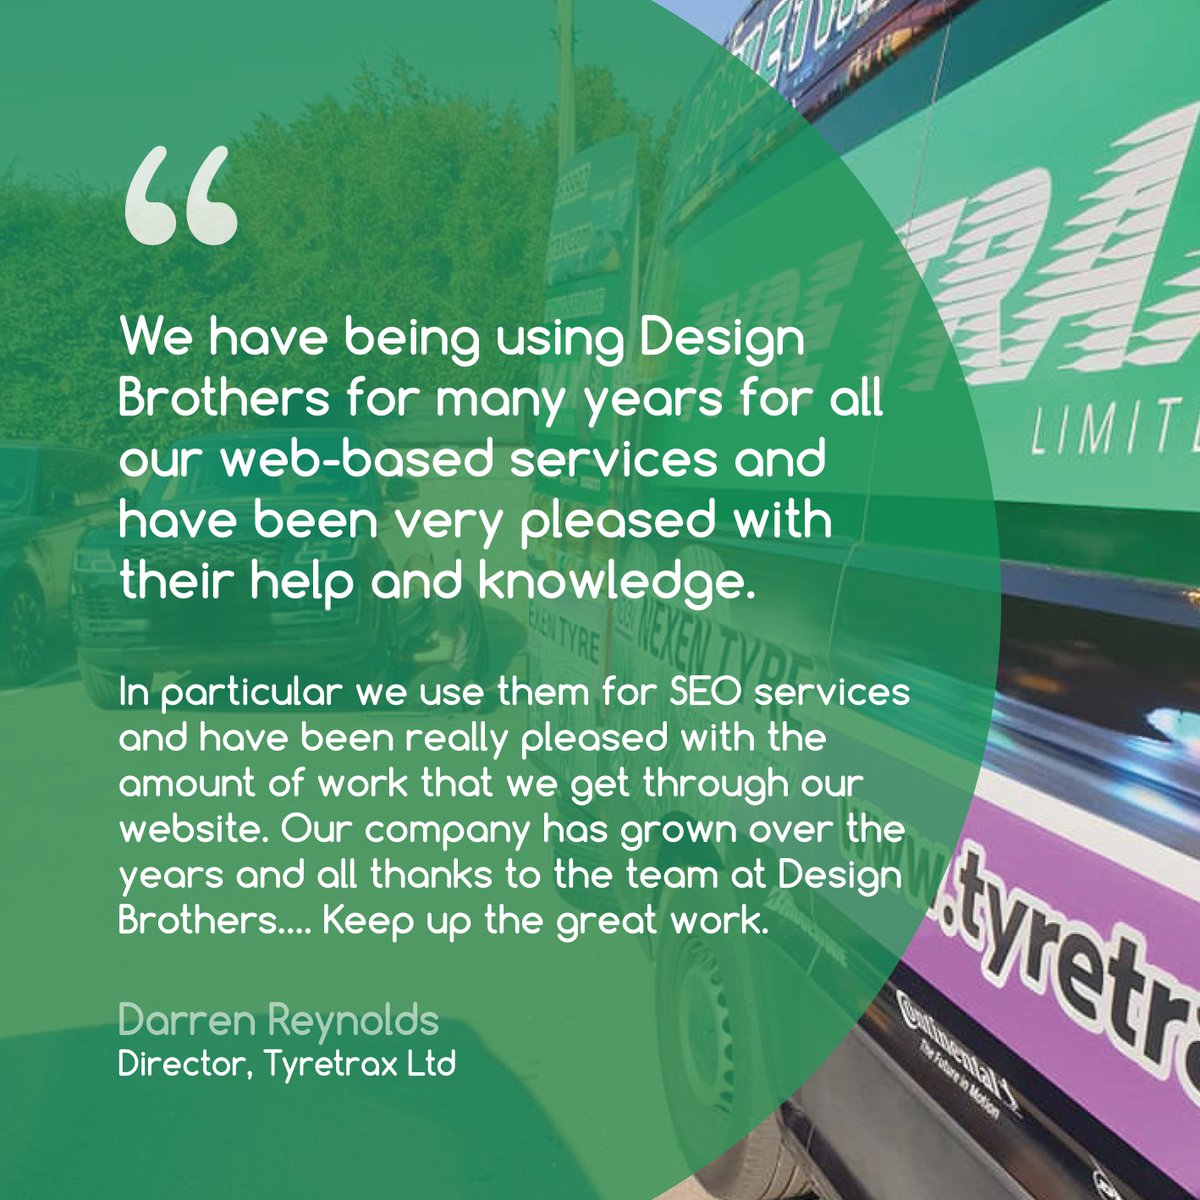 Our customer has been with us for over 15 years and we were over the moon to receive this super review from them

#seo #seolondon #londonseo #seoexpert #designbrothers #seolondon #tyretrax #webdesign #webdeveloper #london #croydon #tyres #tyreservices #tyrescroydon #tyrefitting